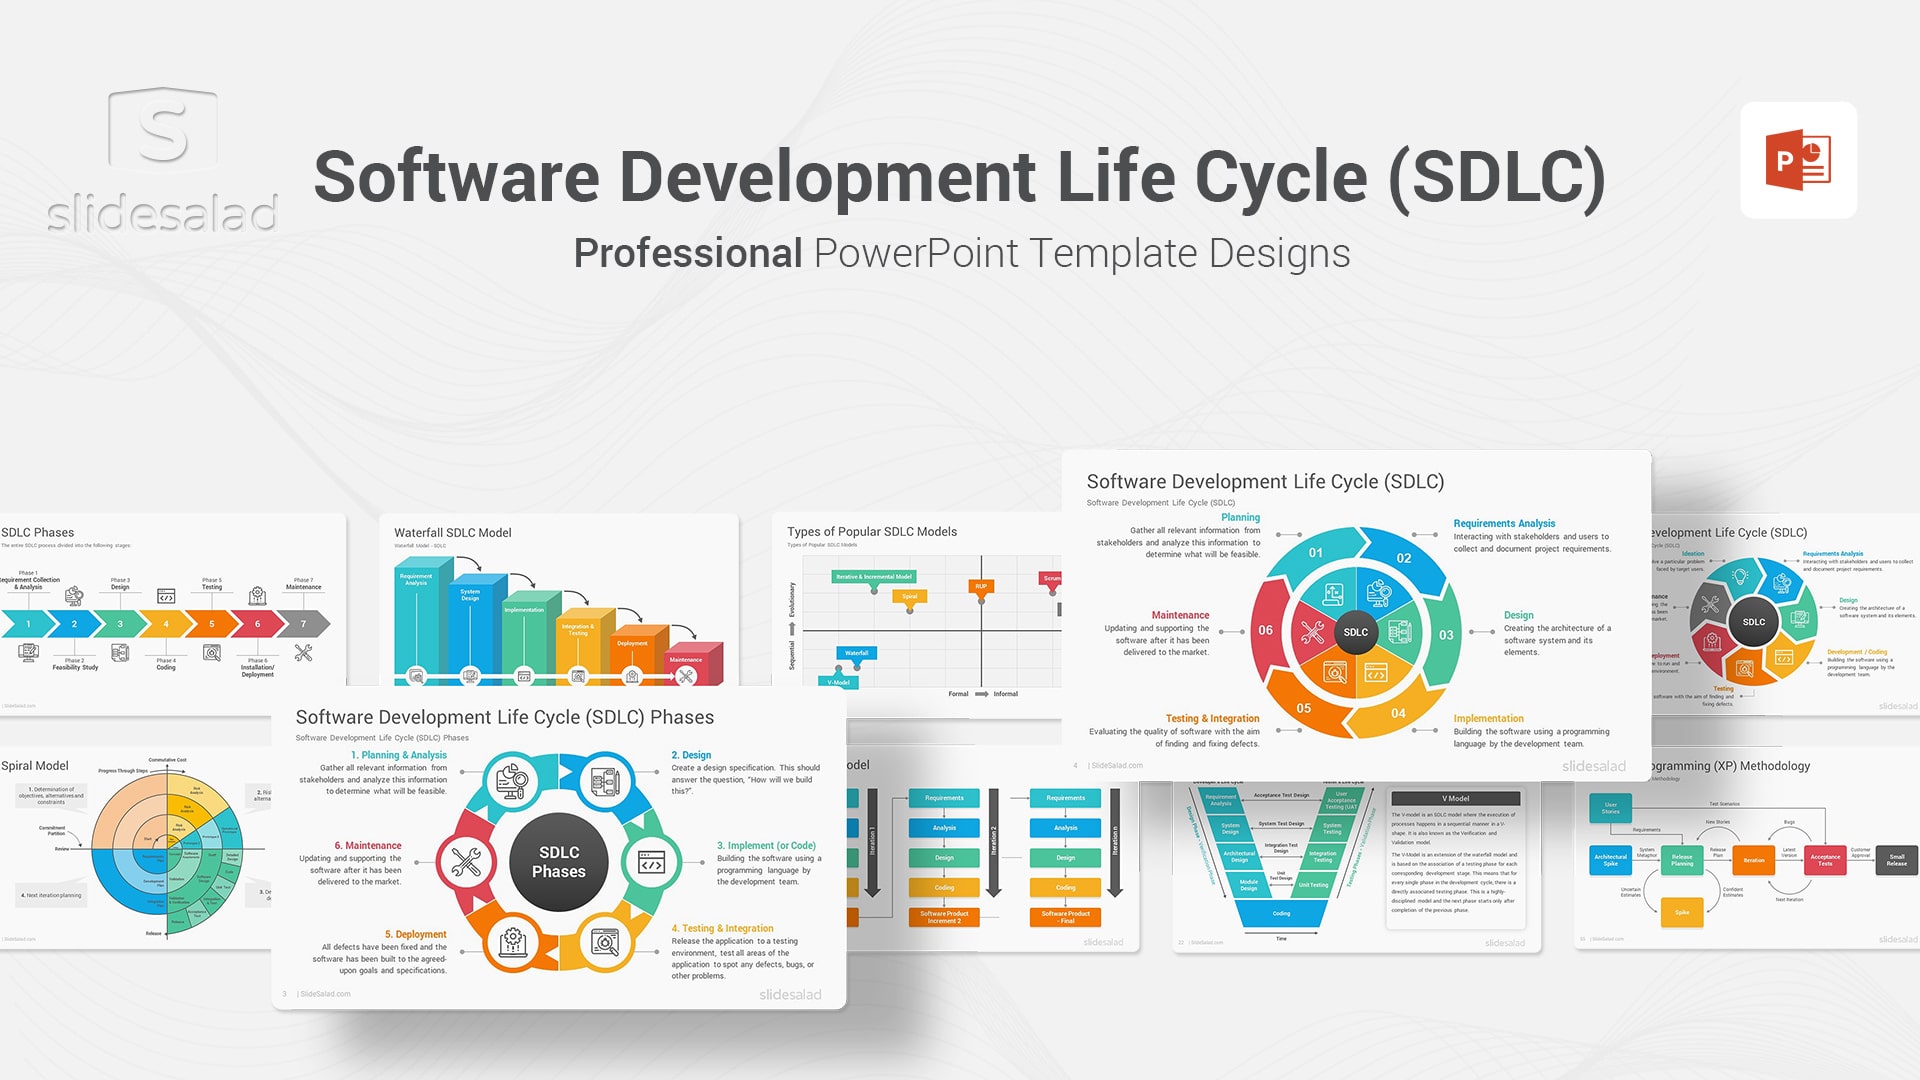 Software Development Life Cycle Models PowerPoint Template - The Best IT PowerPoint Template About How to Make Your SDLC Work for You